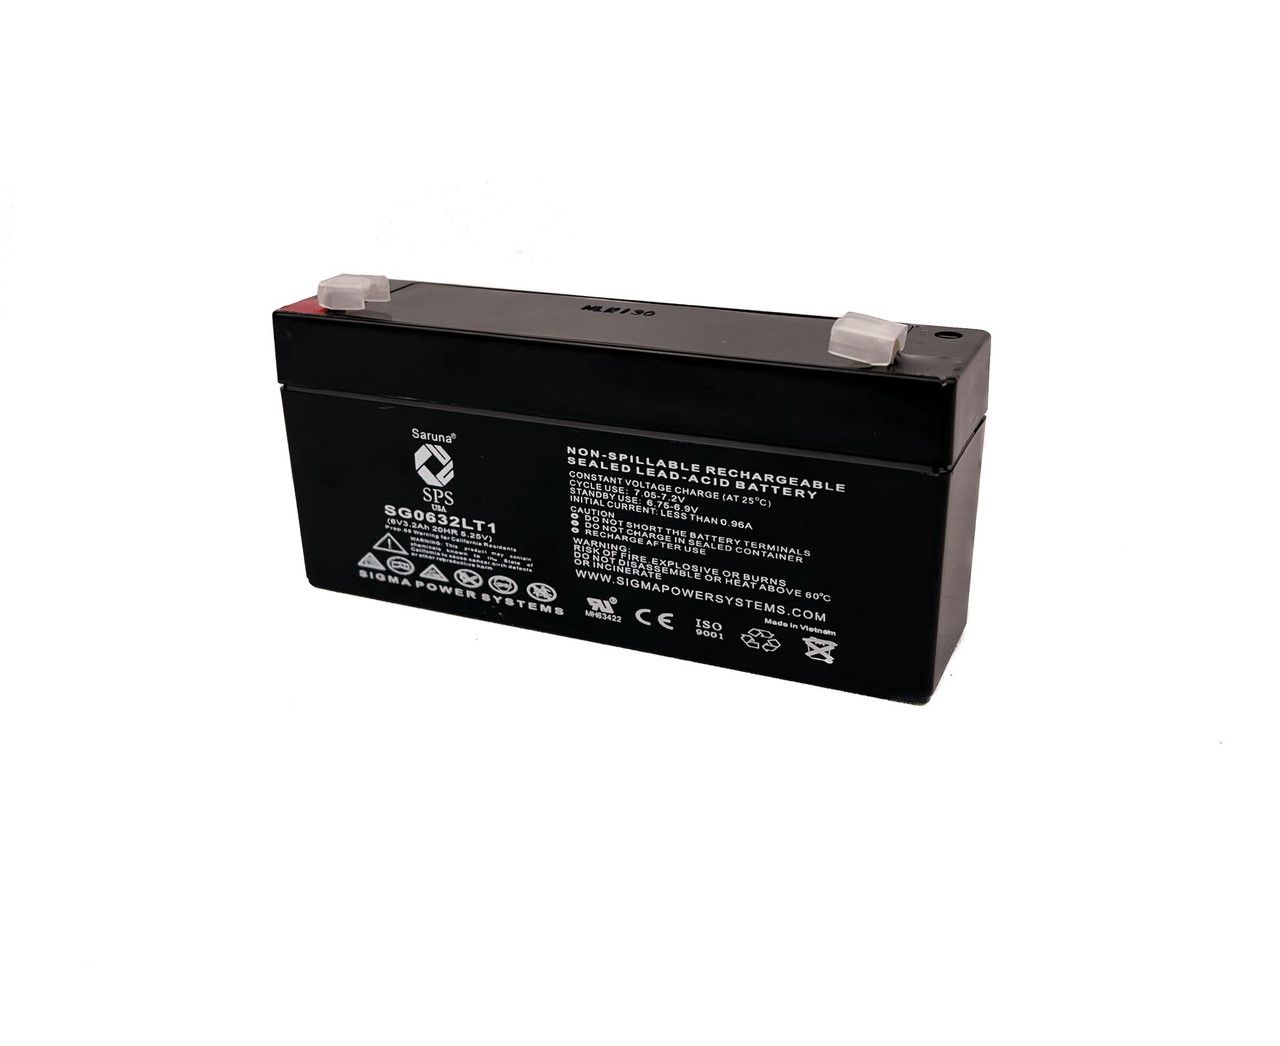 Raion Power 6V 3.2Ah Non-Spillable Replacement Rechargebale Battery for Alaris Medical 590 Infusion Pump (Keofeed II)